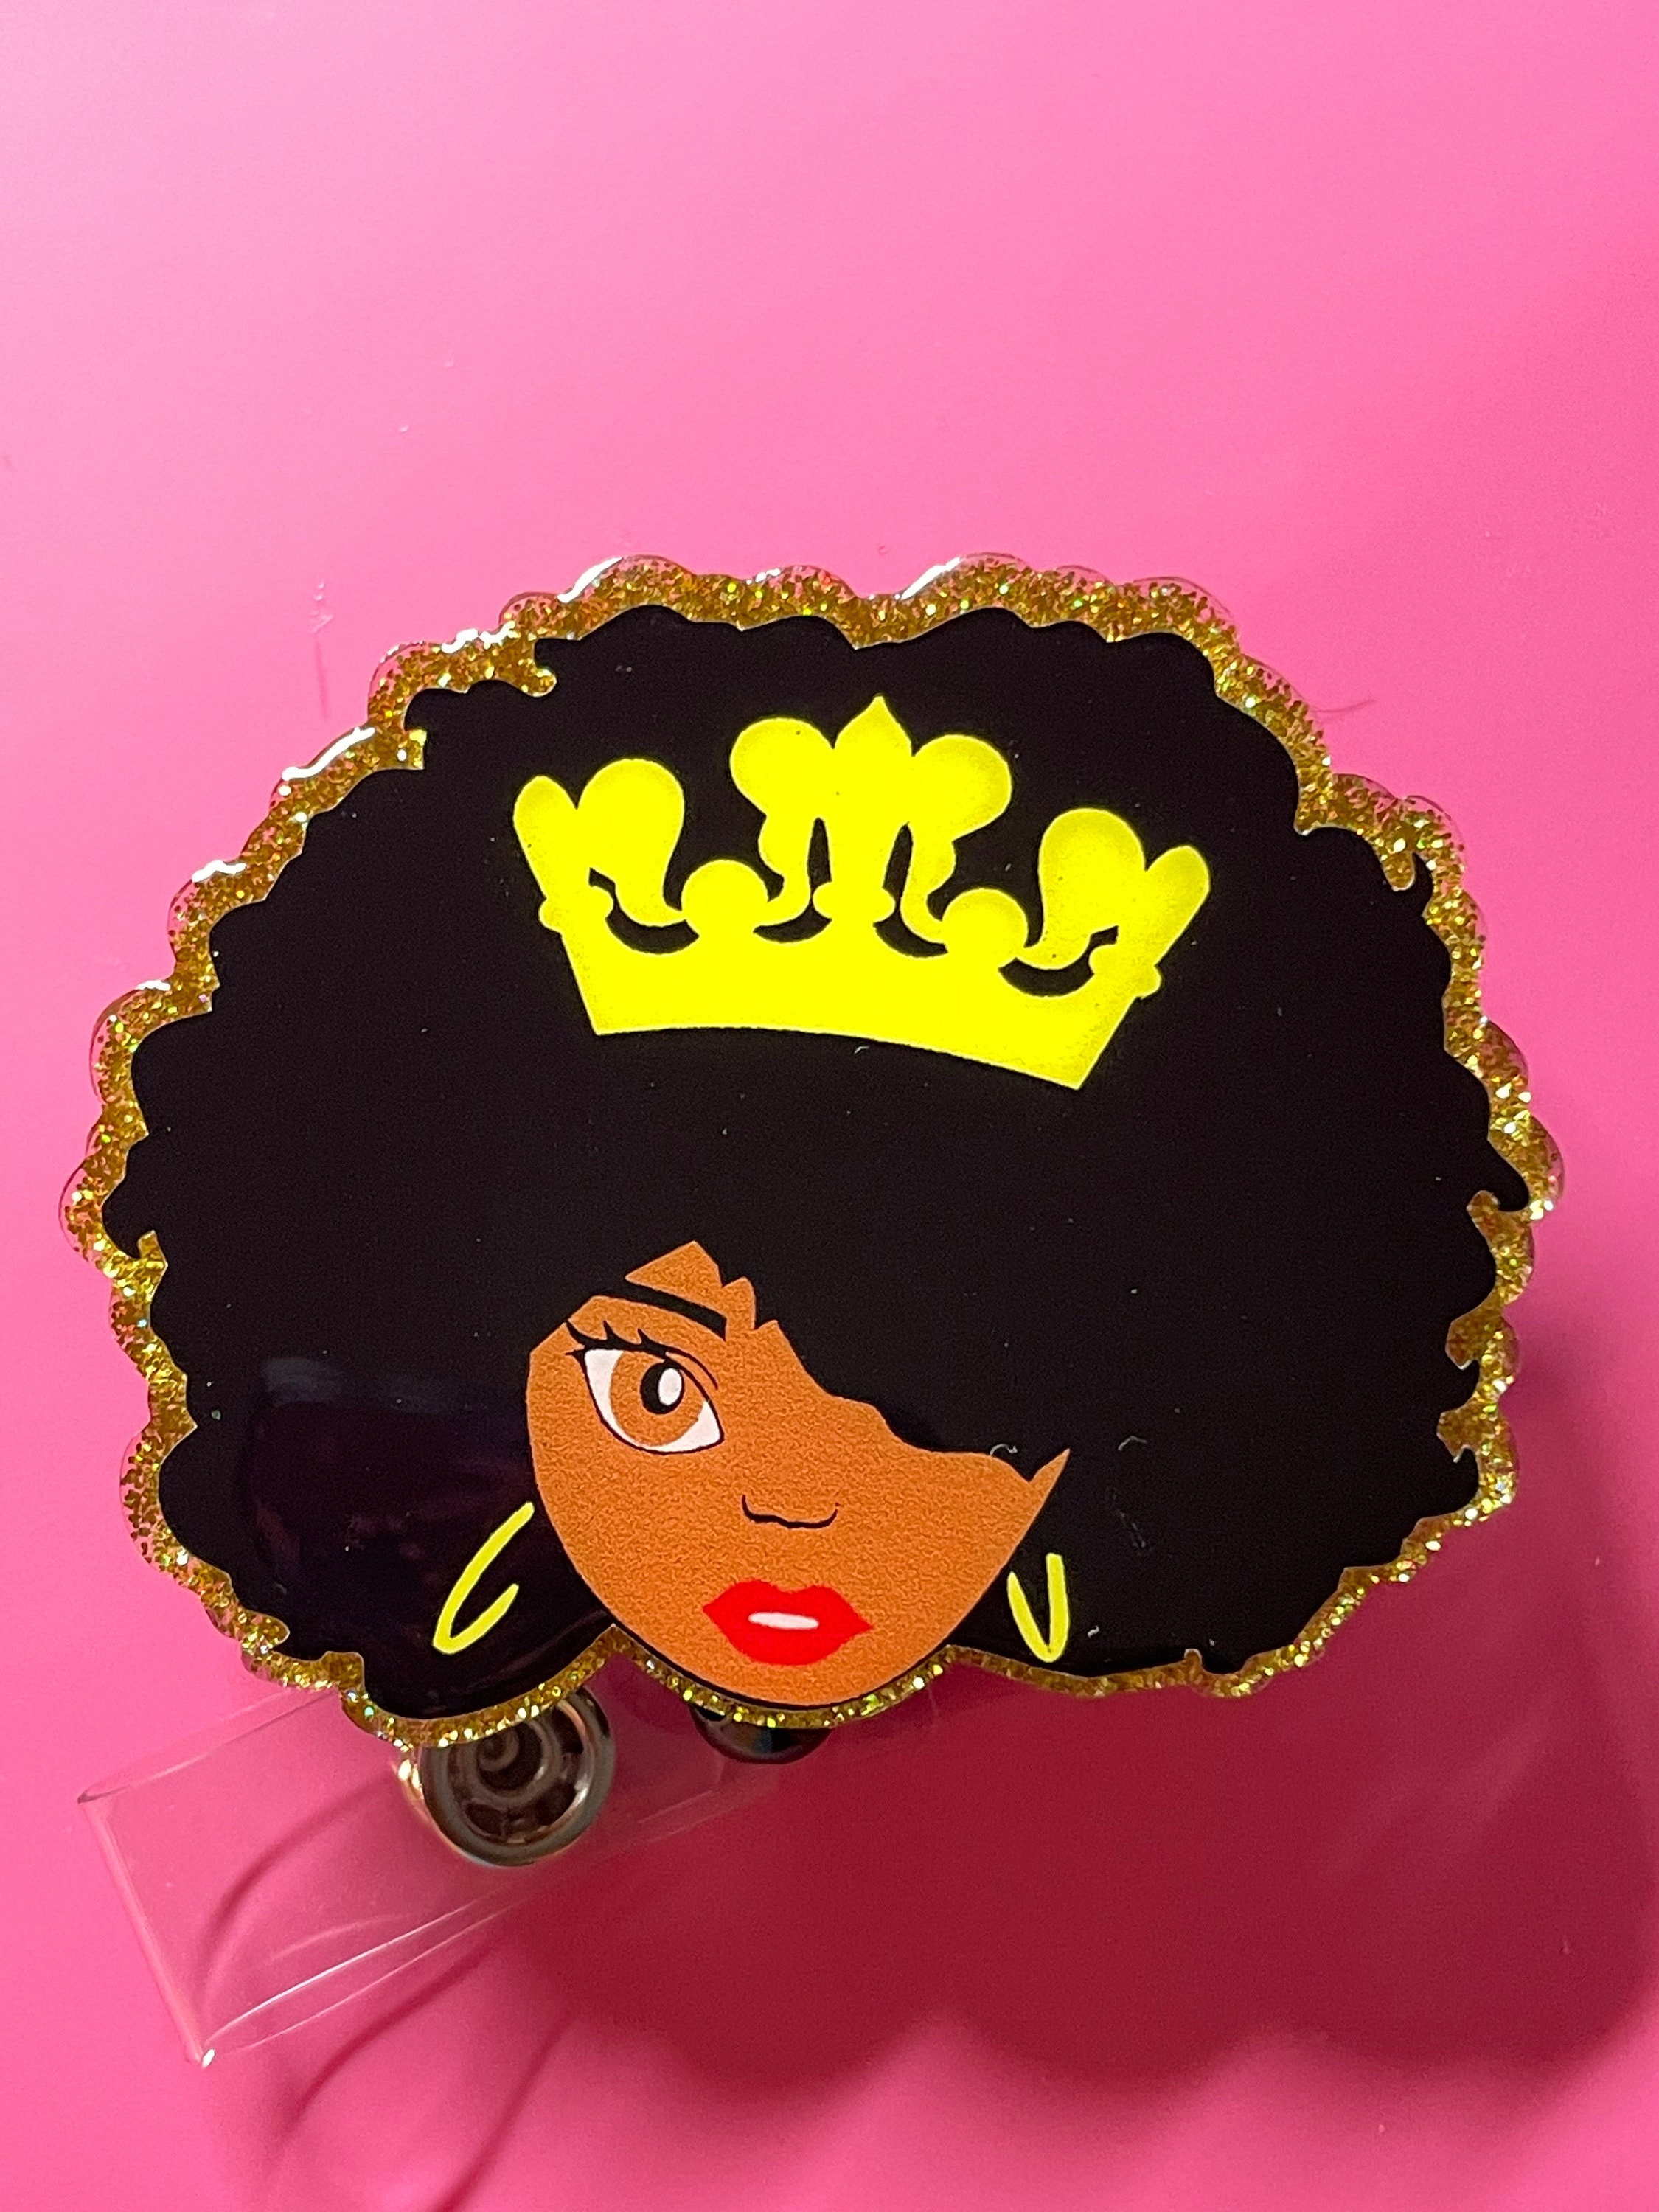 Afro Badge 